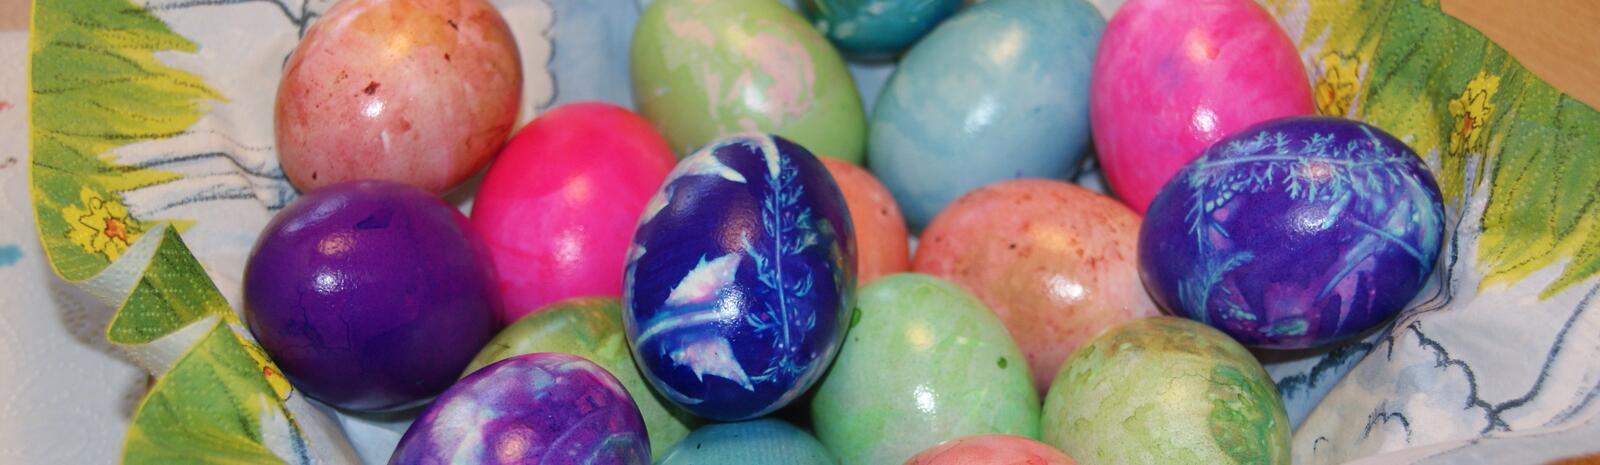 Colorful Easter eggs - naturally colored | © Bianca Passrugger-Lörgetbohrer